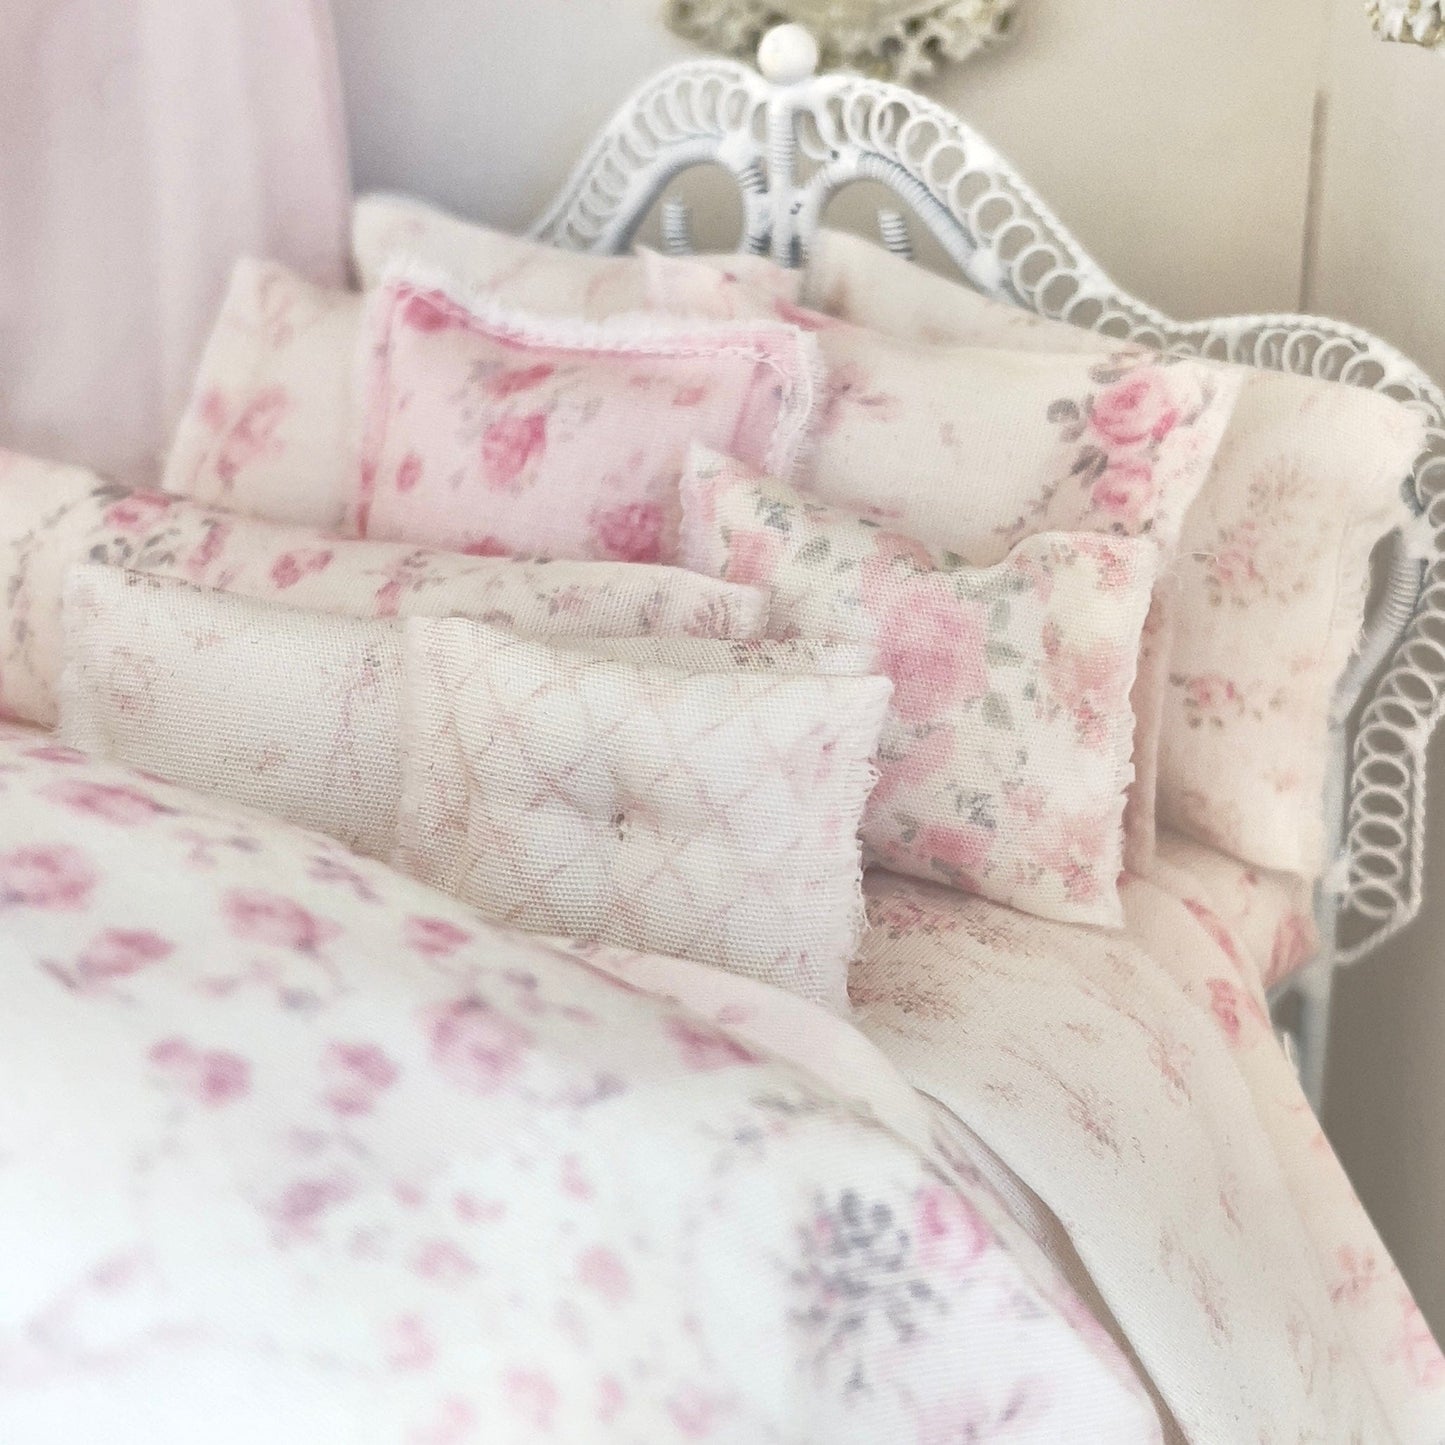 Chantallena Doll House Dressed Bed |Assorted Pink Floral Cotton with Floral Bow Accent | Flossie